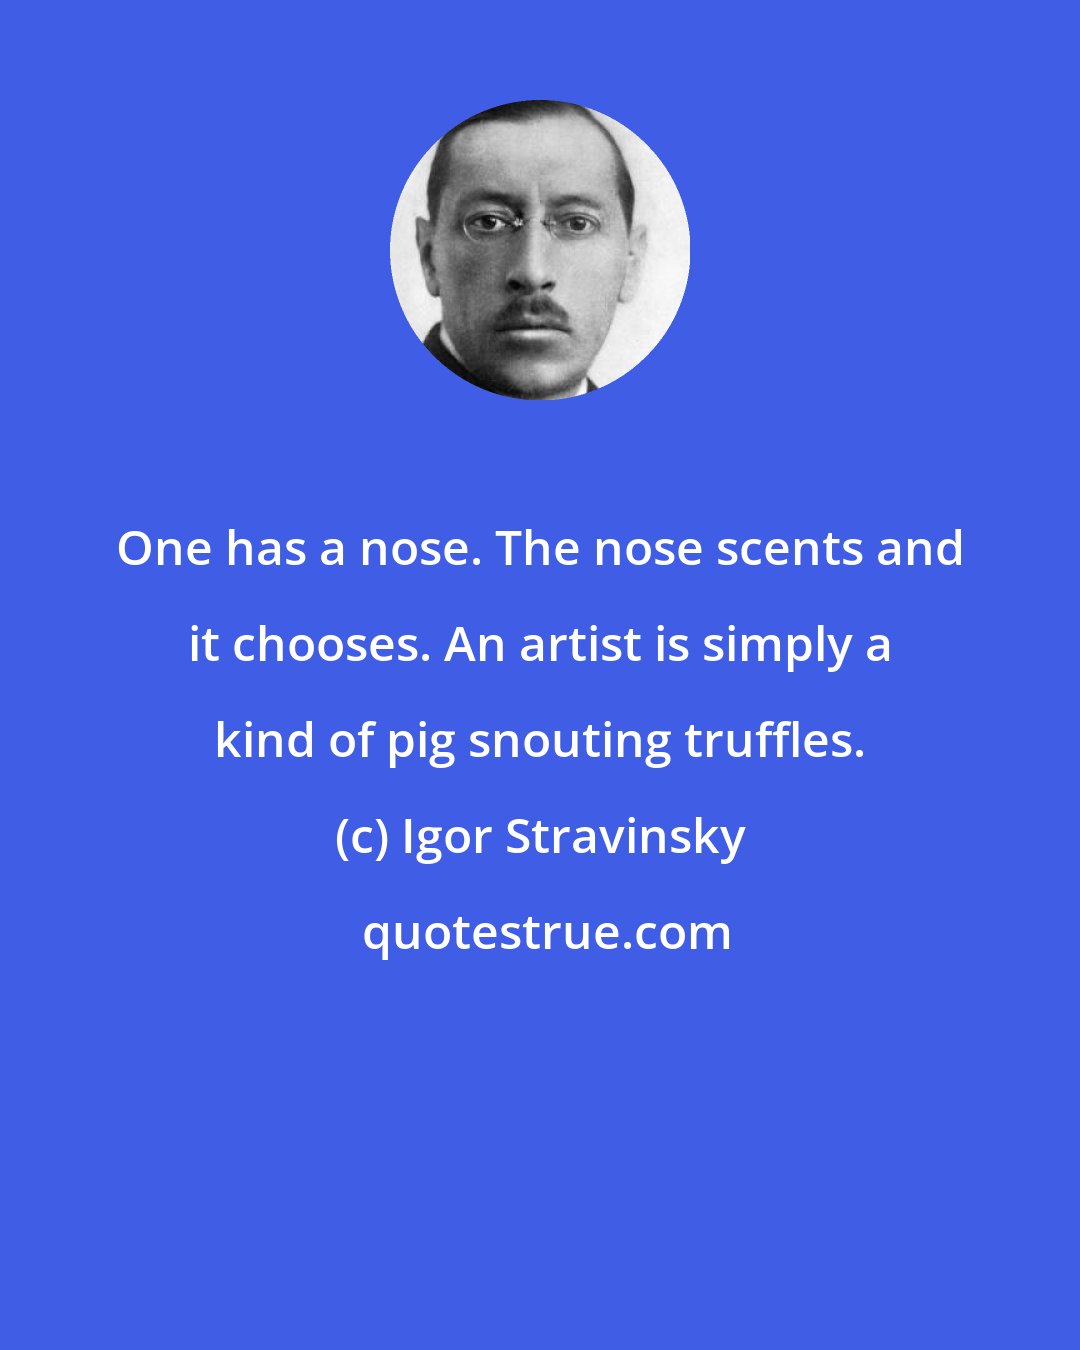 Igor Stravinsky: One has a nose. The nose scents and it chooses. An artist is simply a kind of pig snouting truffles.